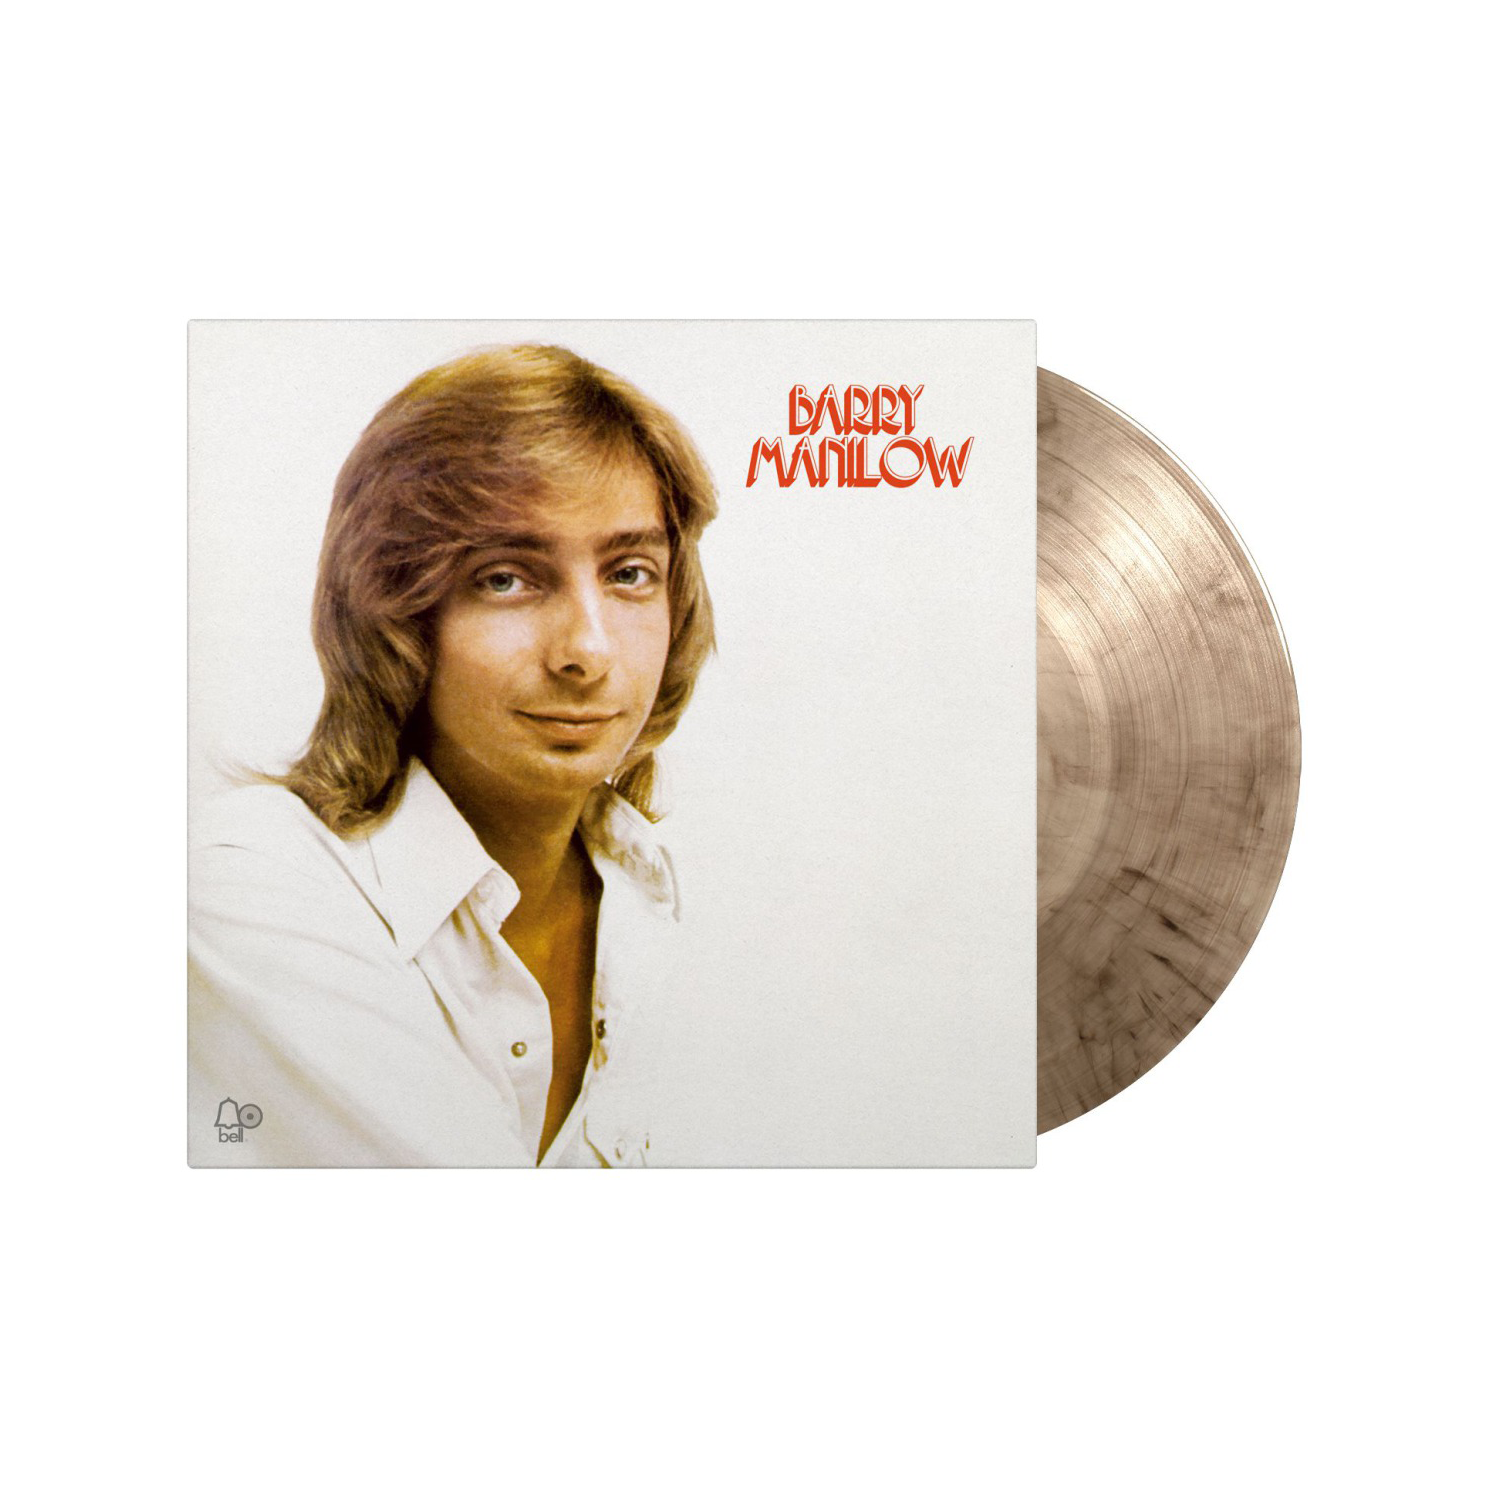 Barry Manilow: Limited Edition Smokey Coloured Vinyl LP